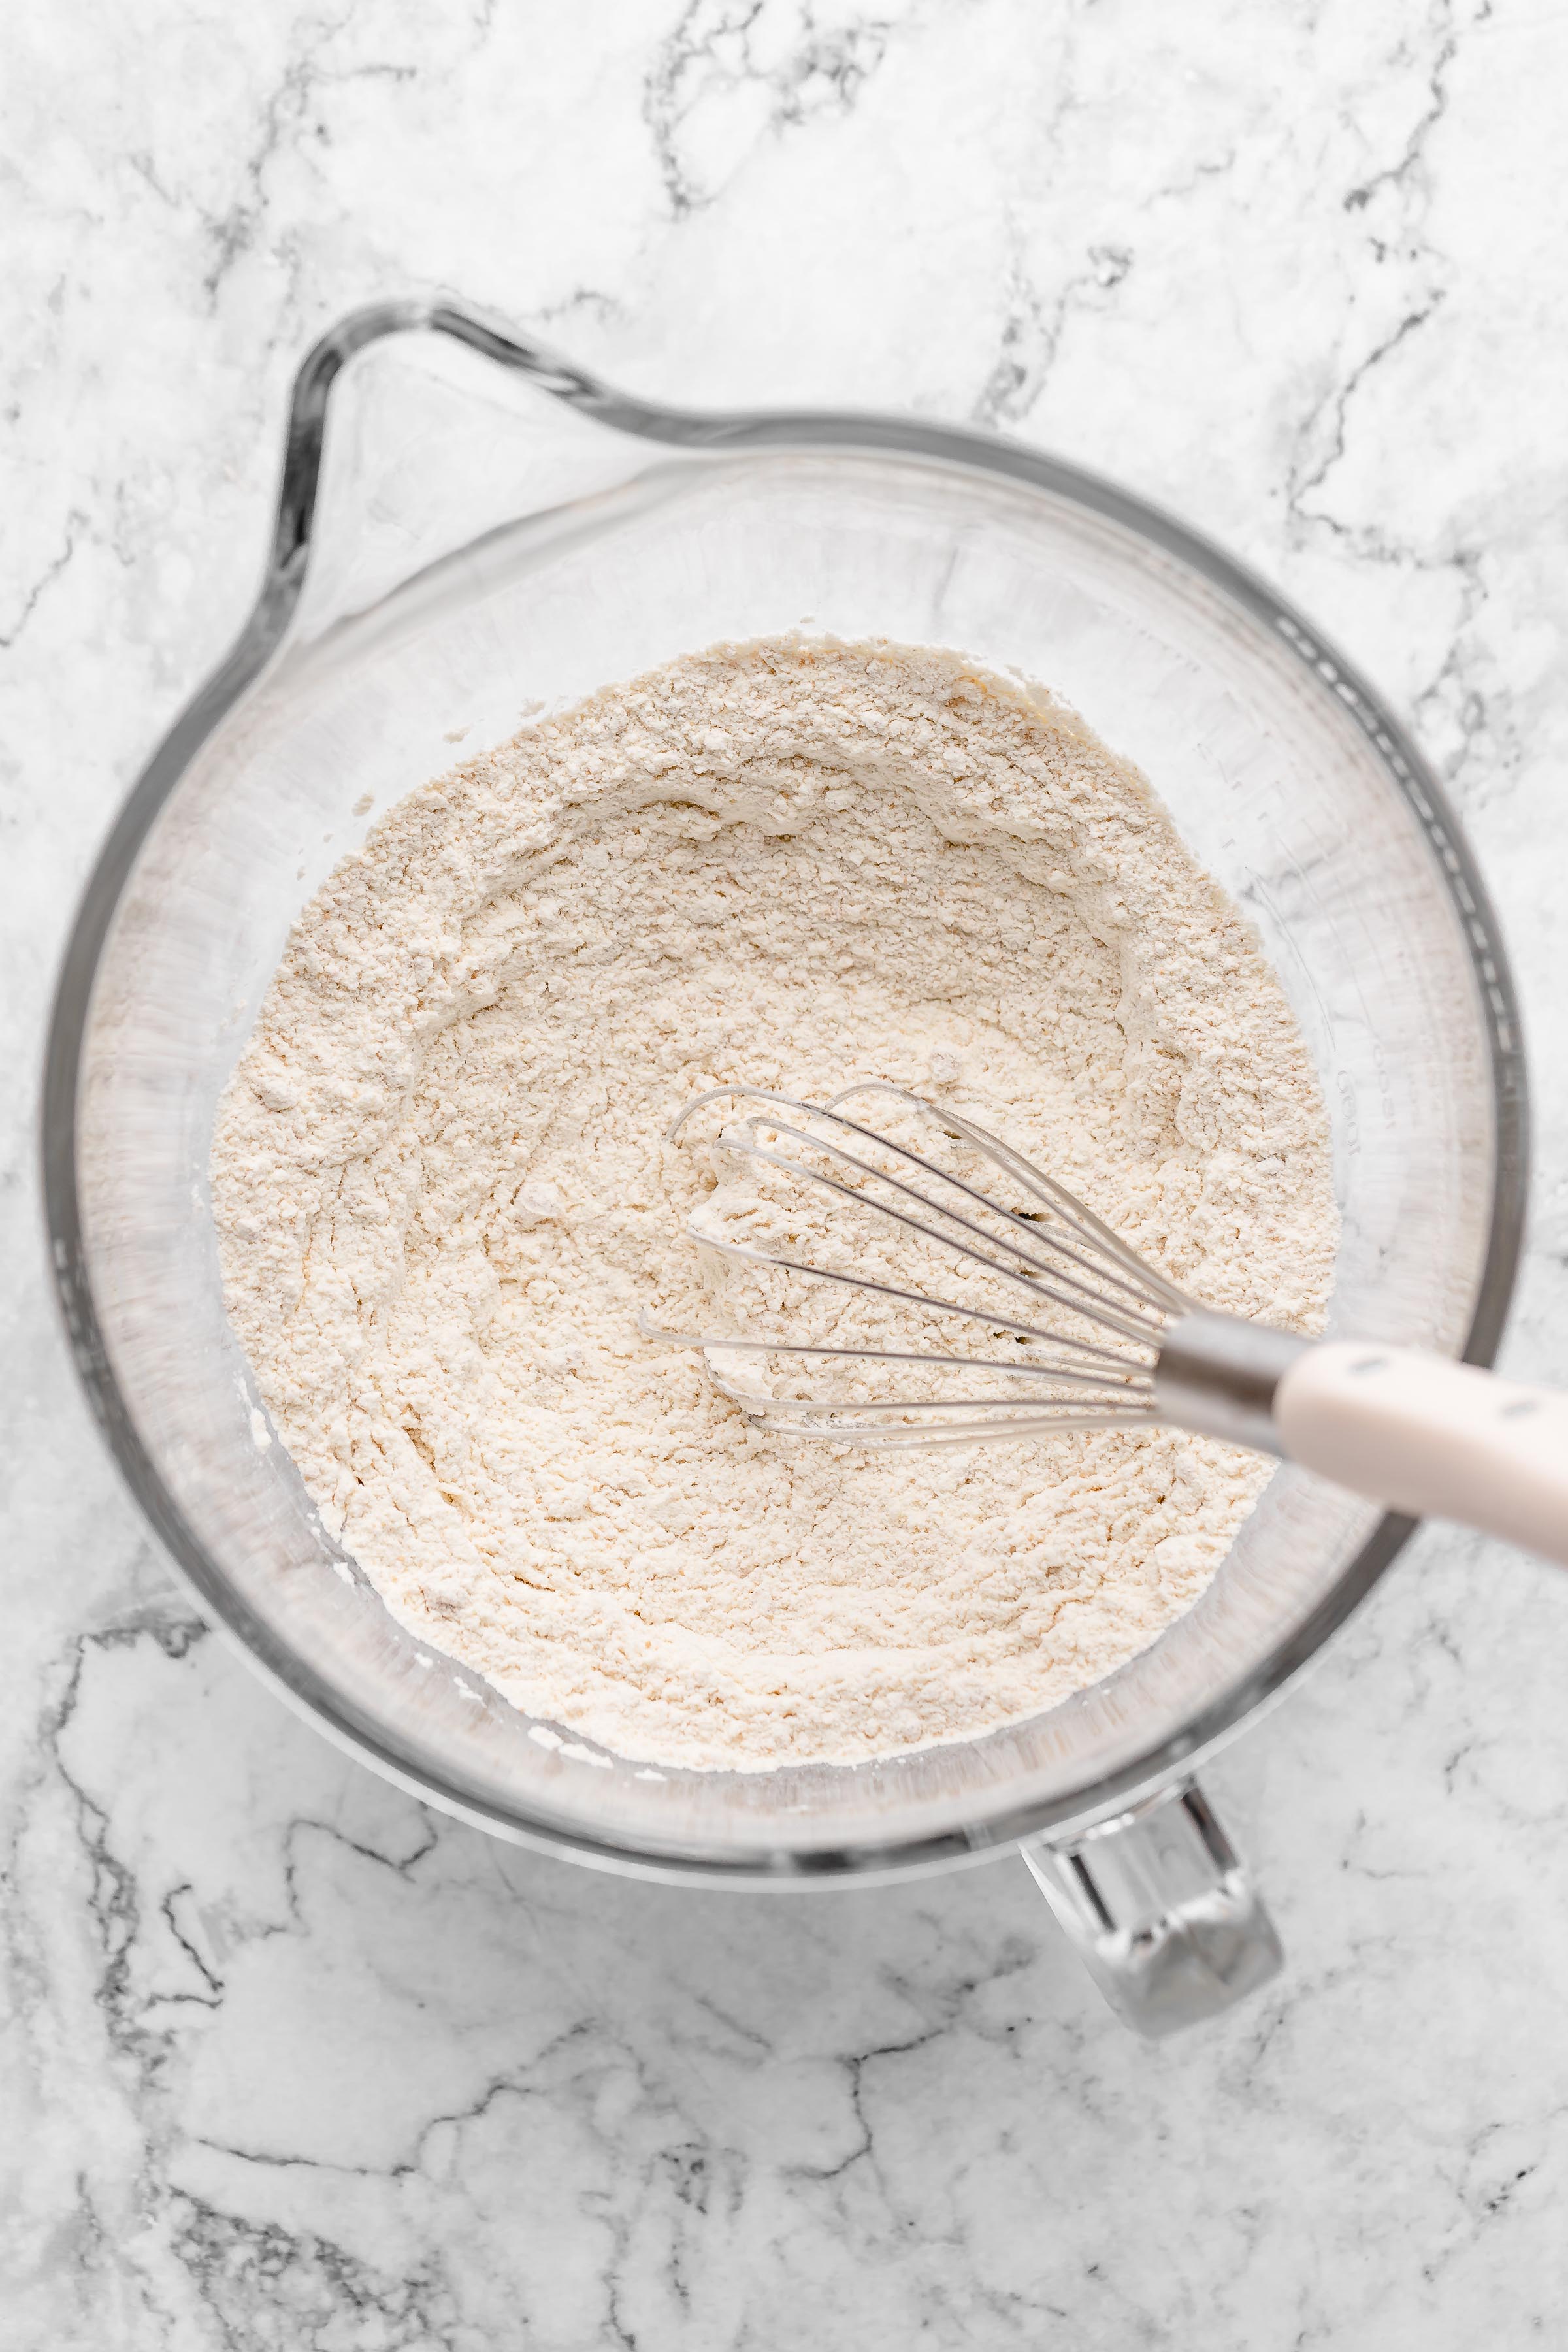 Overhead view of dry bread ingredients in glass mixing bowl with whisk